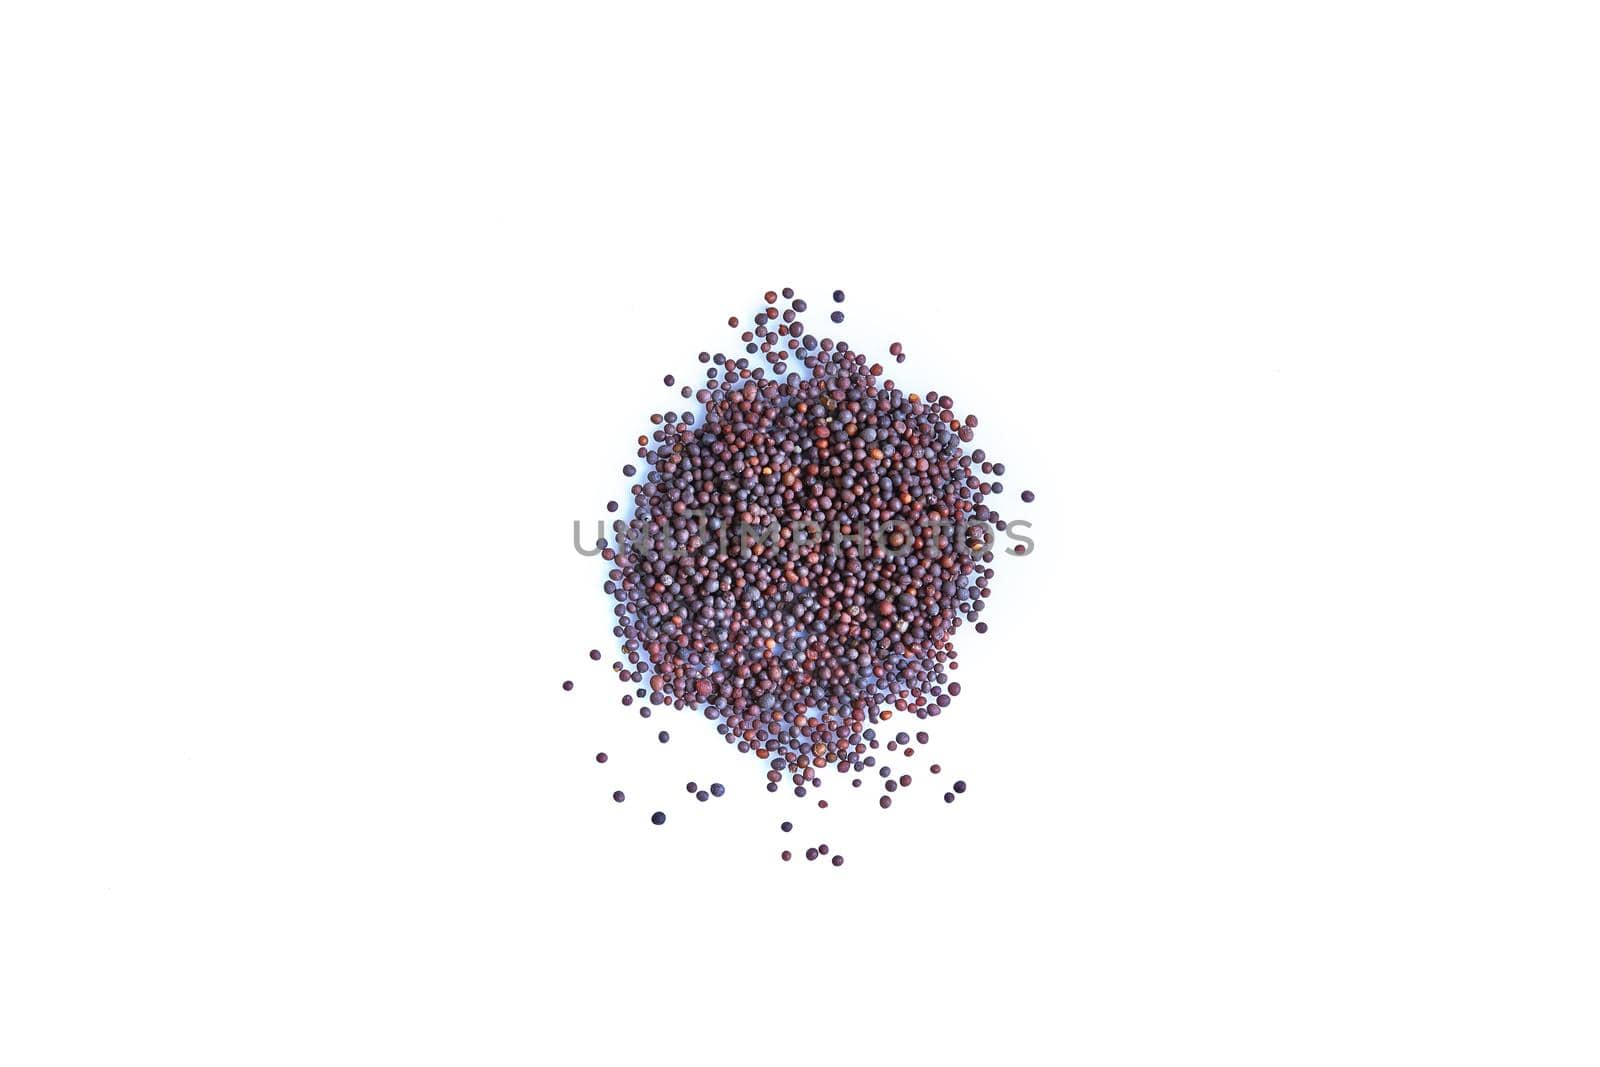 Black mustard seeds spices on white background. Close-up